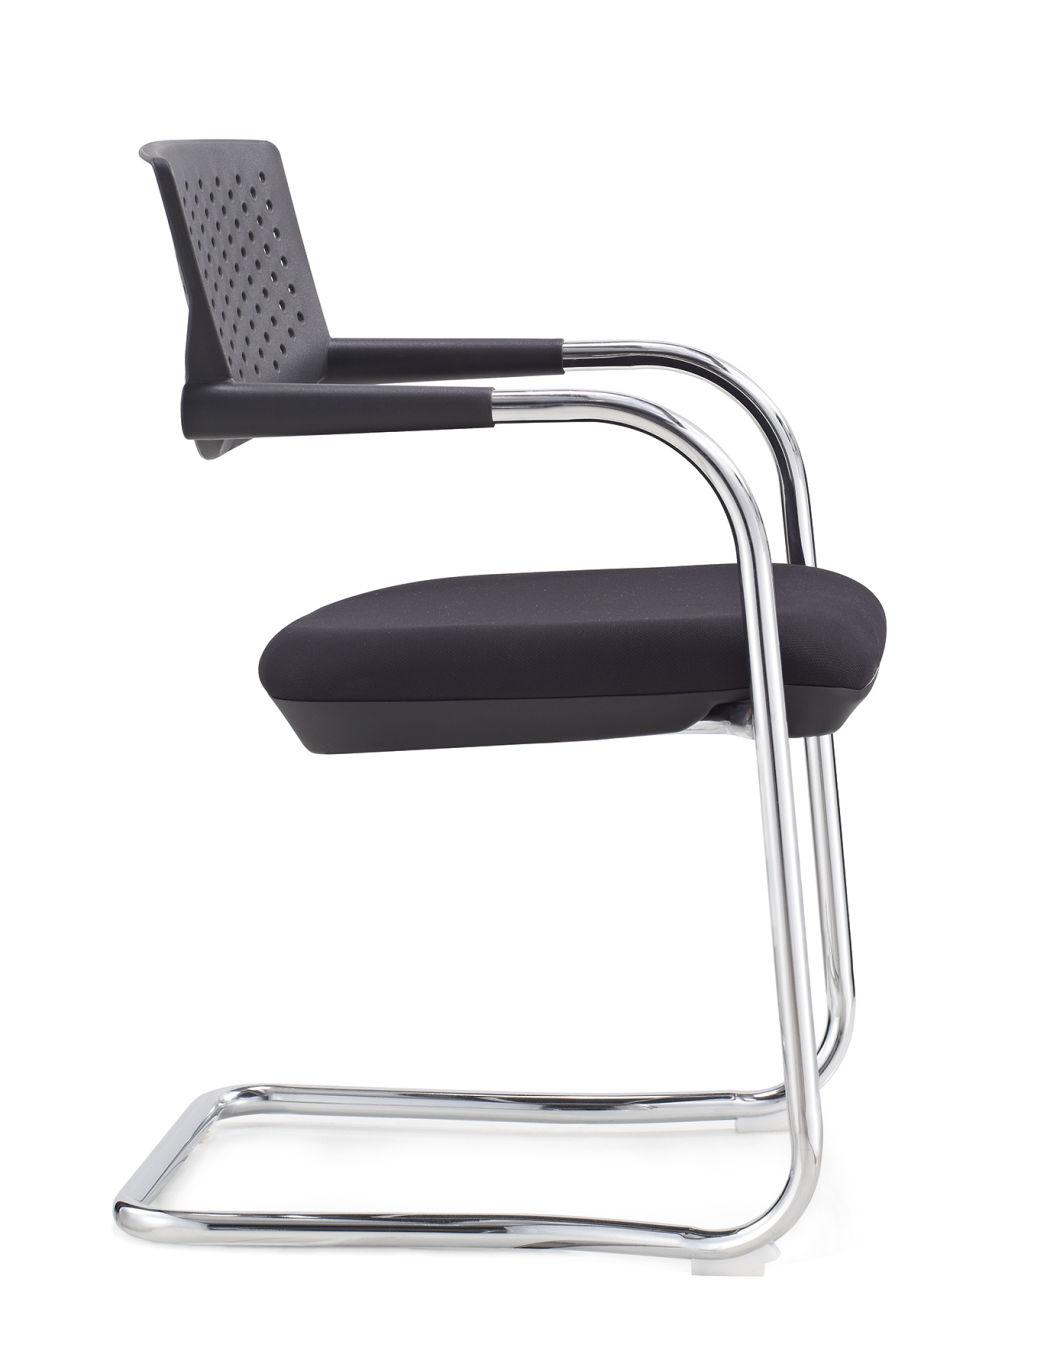 Topsell Promotion Furniture Plastic Computer Study Conference Training Visitor Office Chair